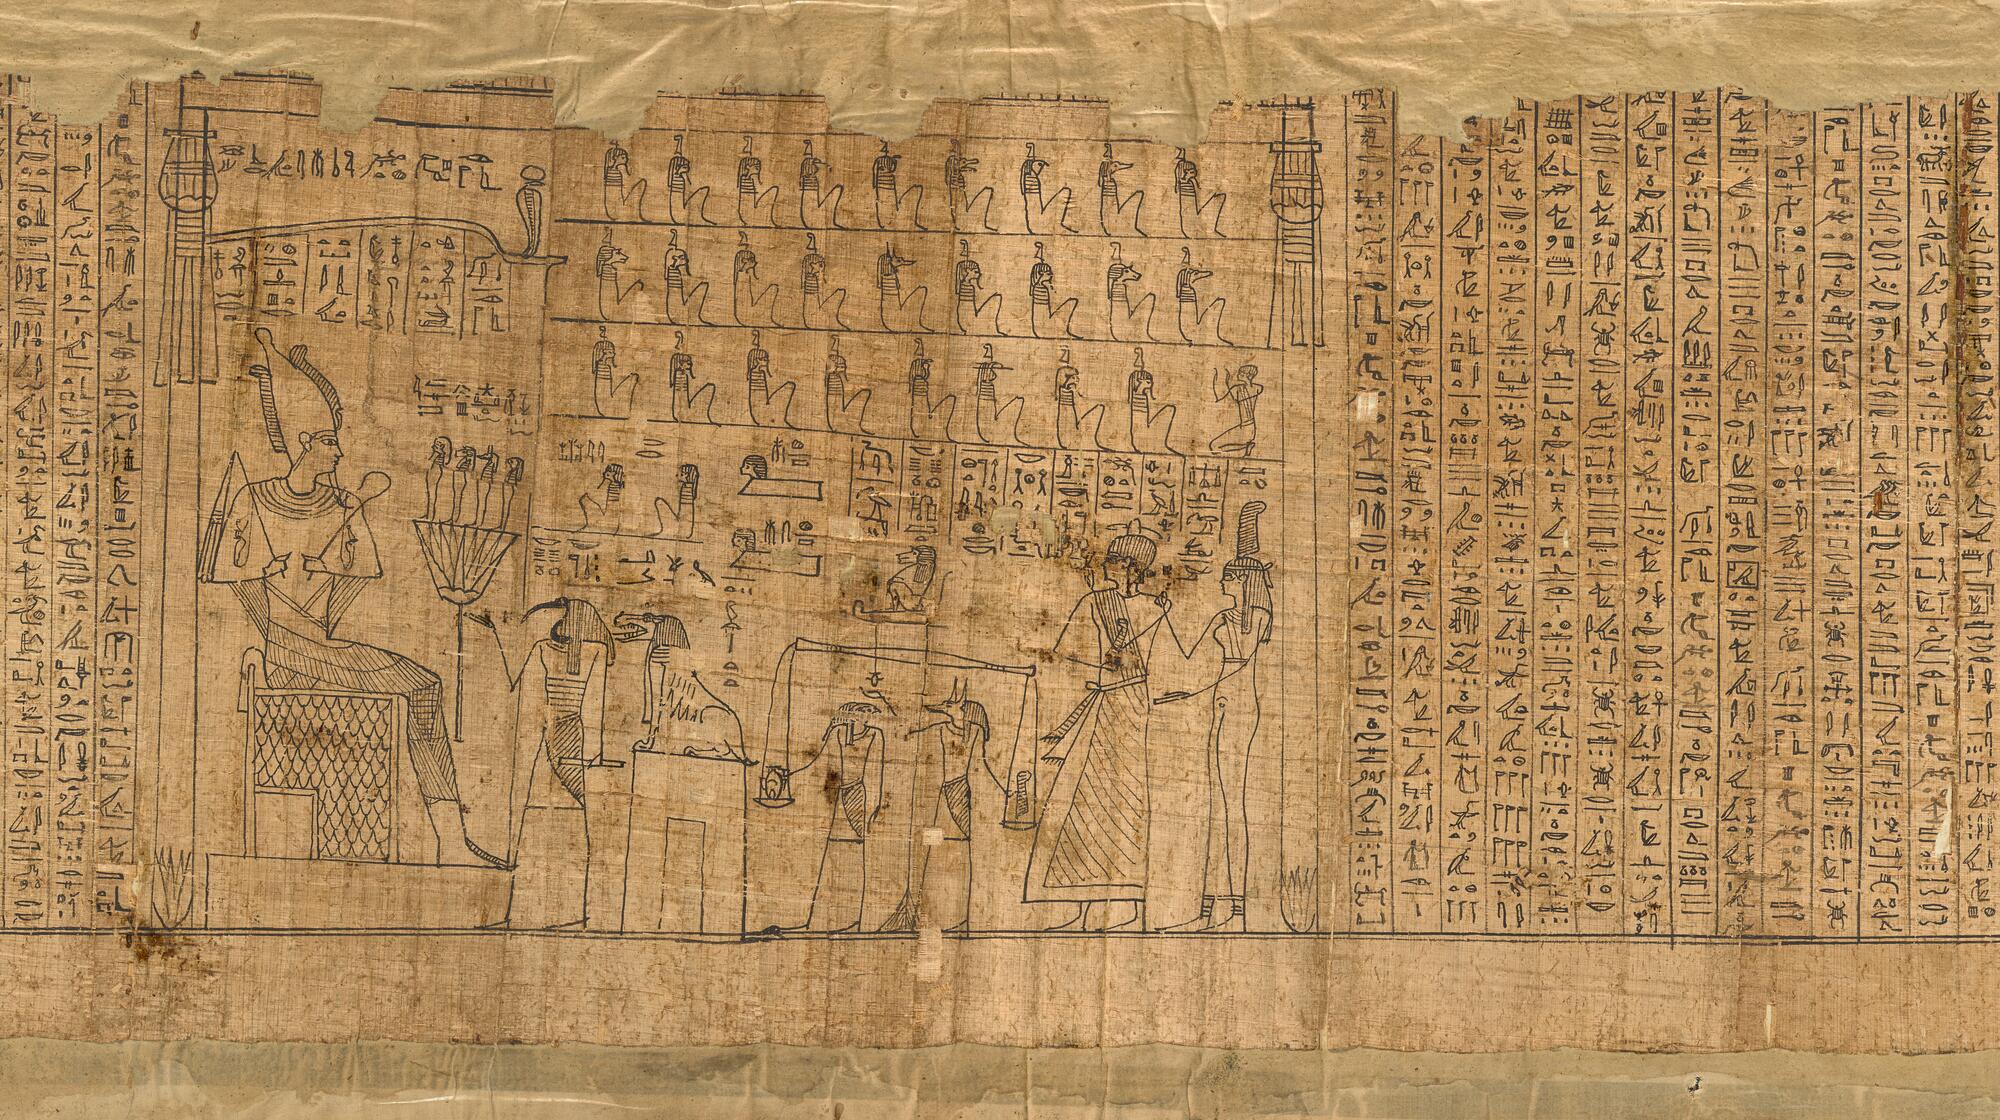 A piece of ancient papyrus shows the god Osiris on a throne receiving the deceased in the afterlife under a canopy